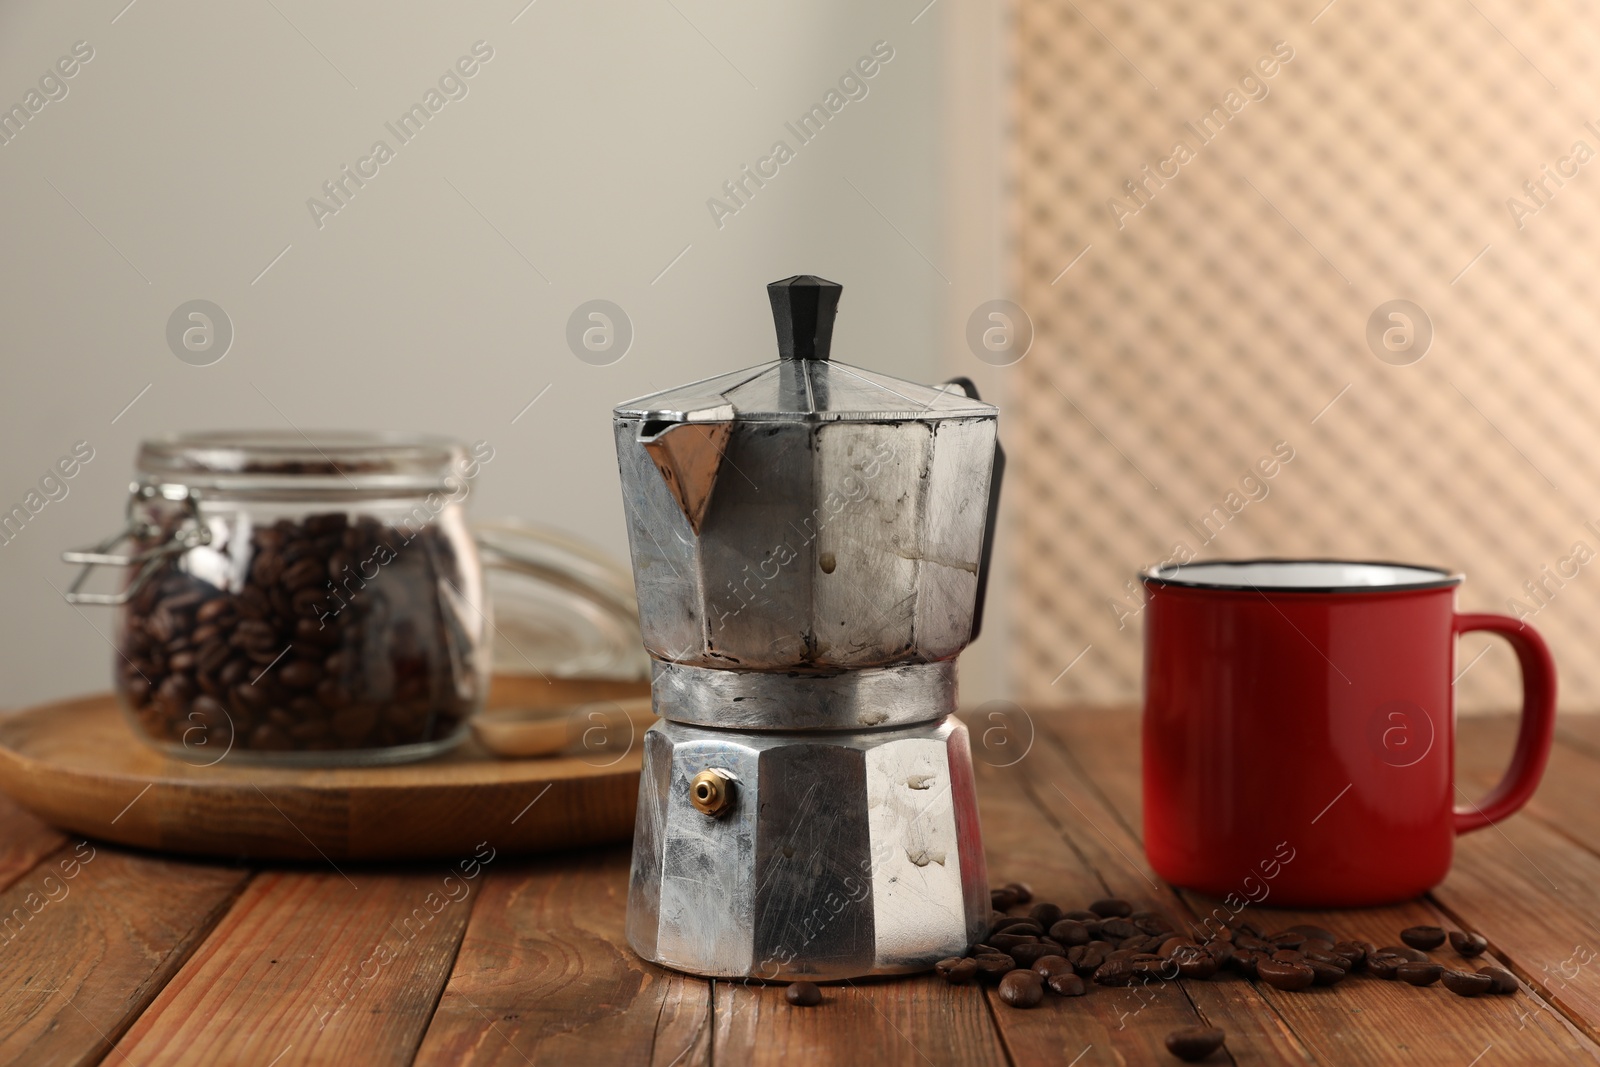 Photo of Moka pot, coffee beans and red mug on wooden table indoors